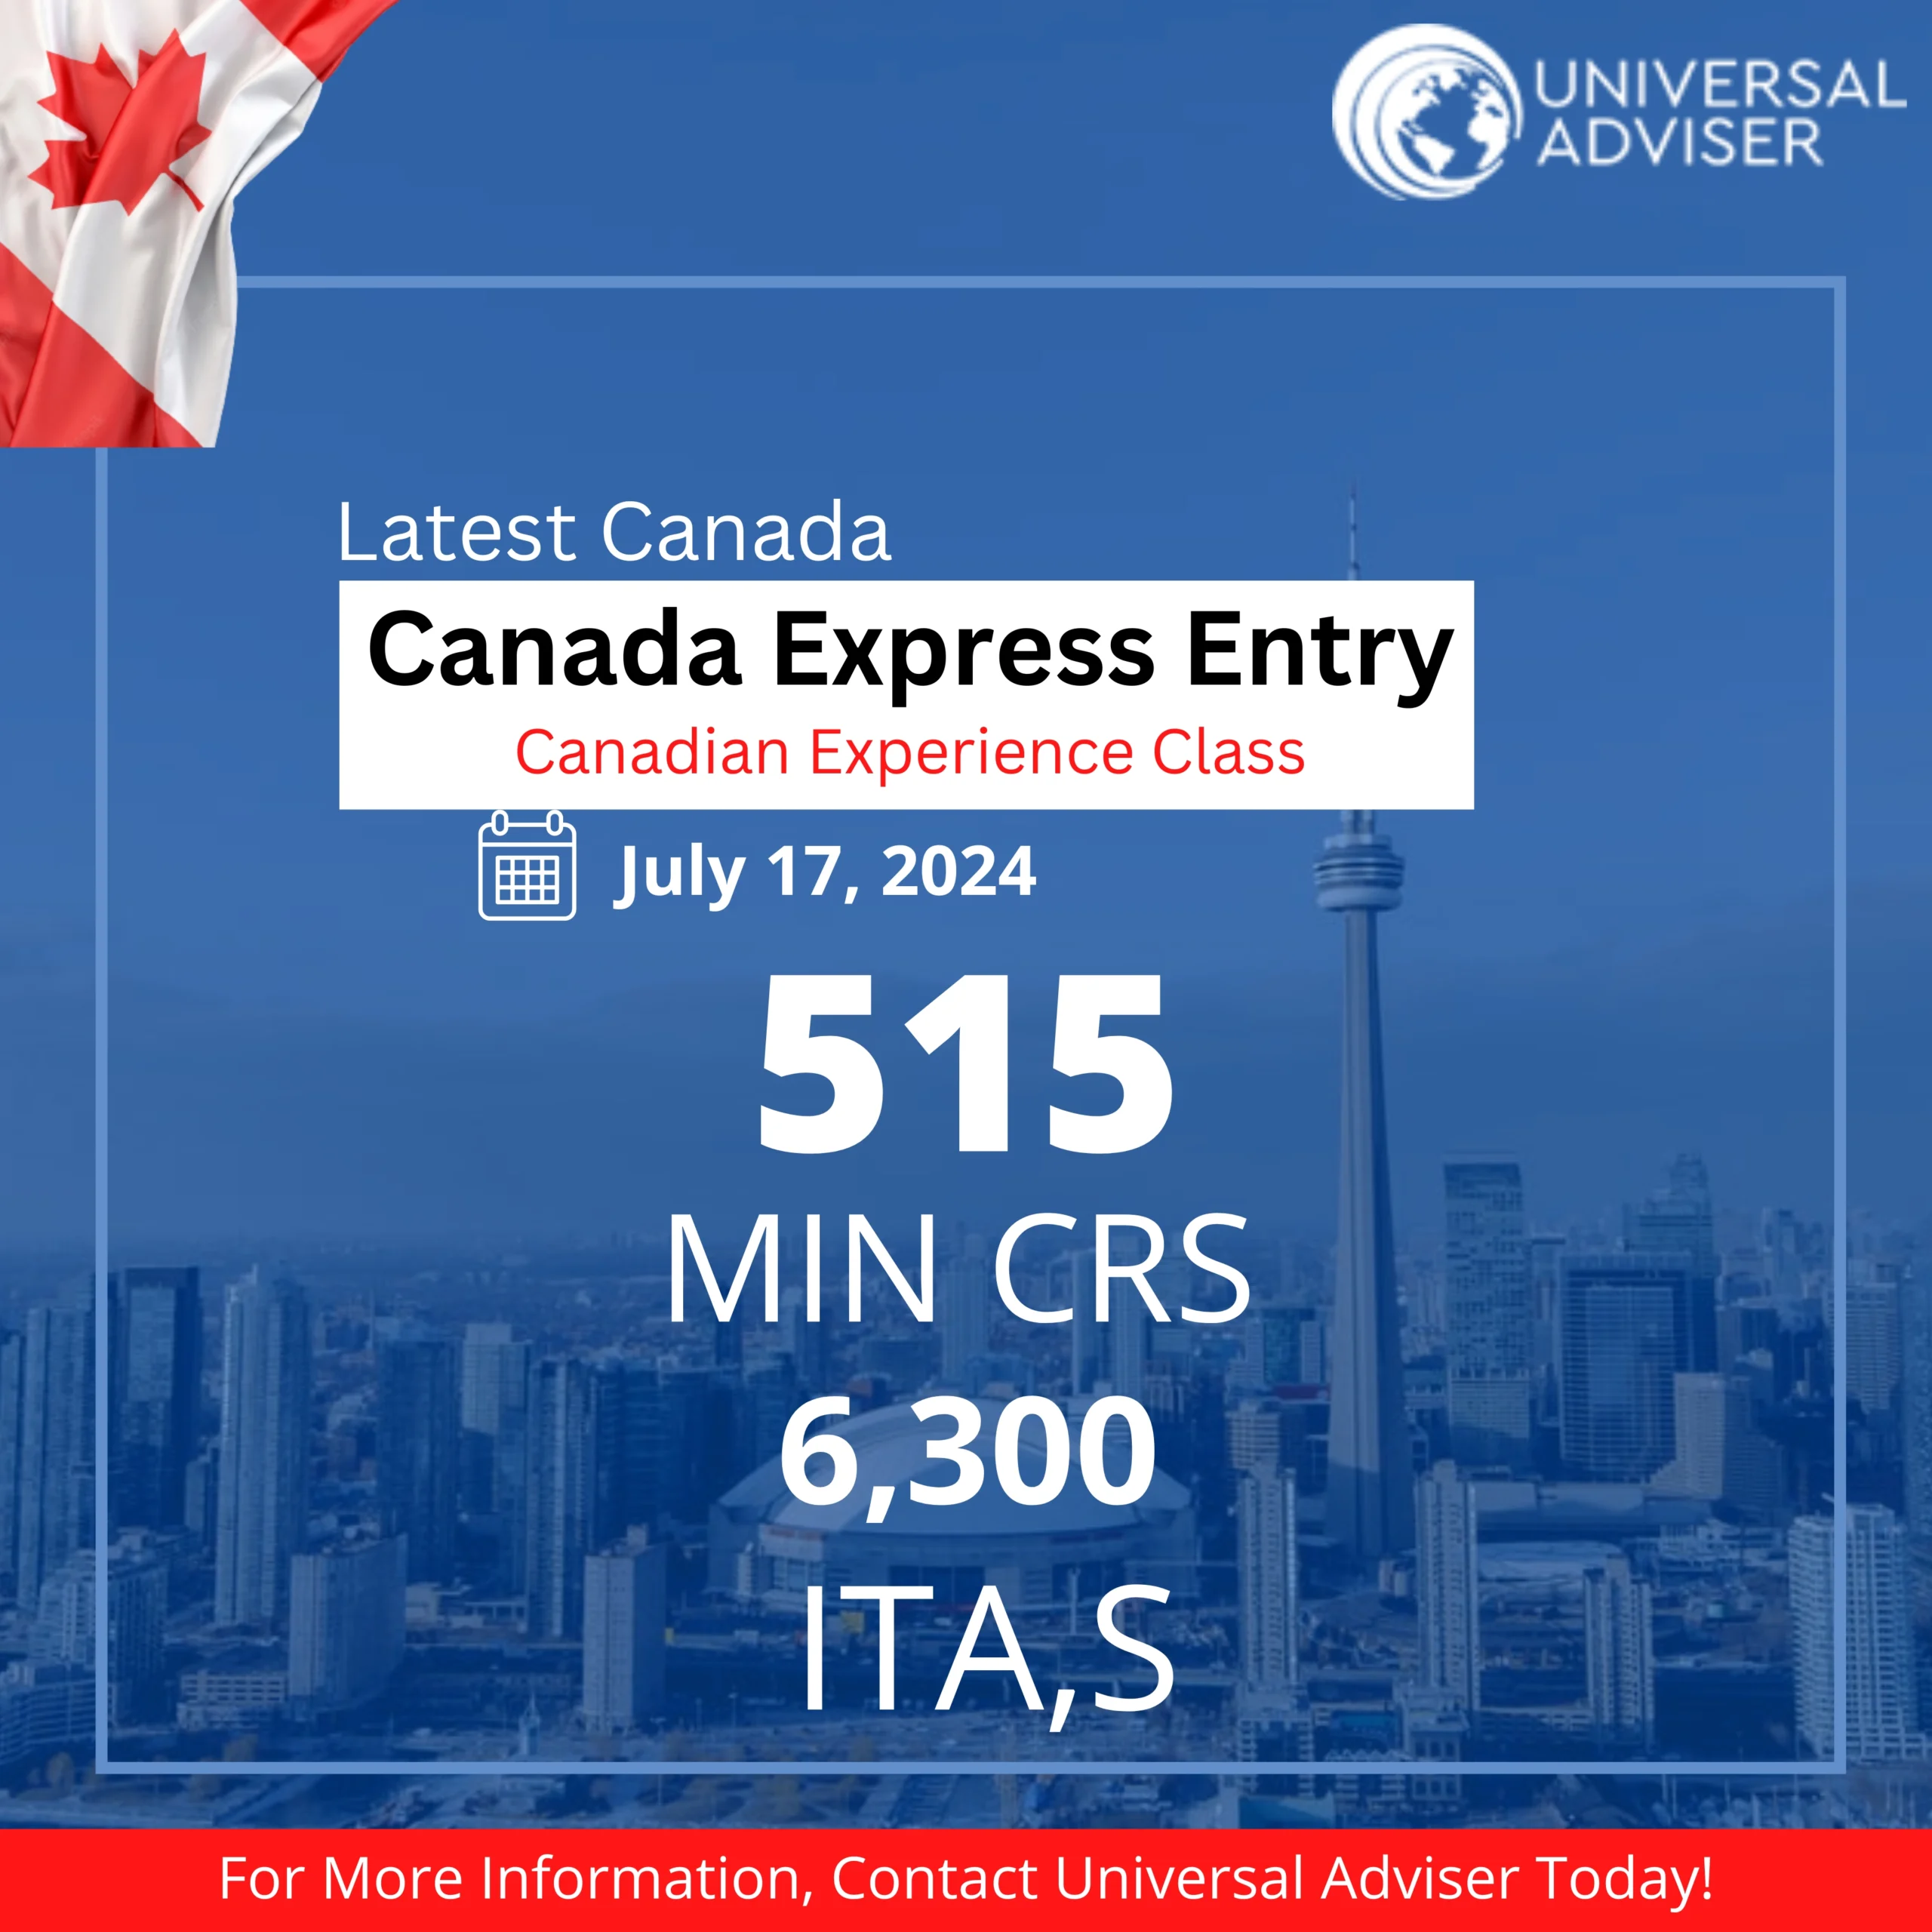 IRCC invites 6,300 Canadian Experience Class candidates in latest Express Entry draw